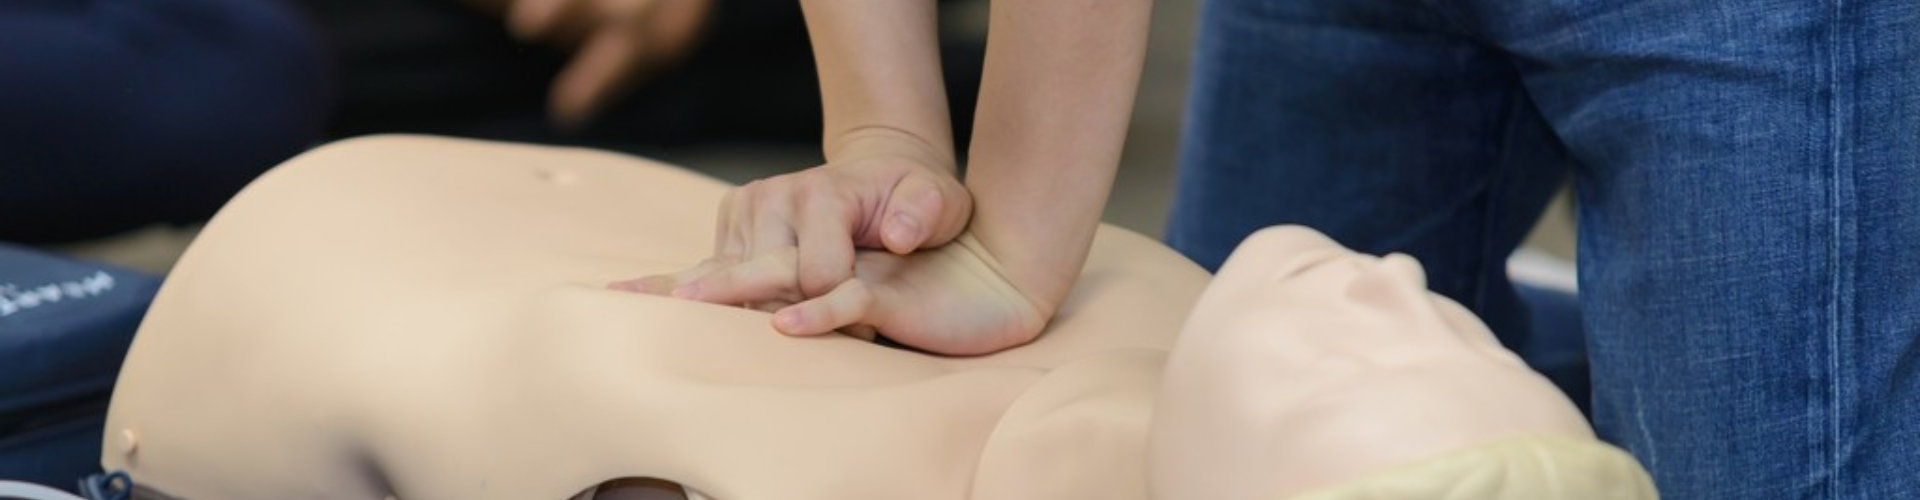 demonstrating chest compressions on cpr doll